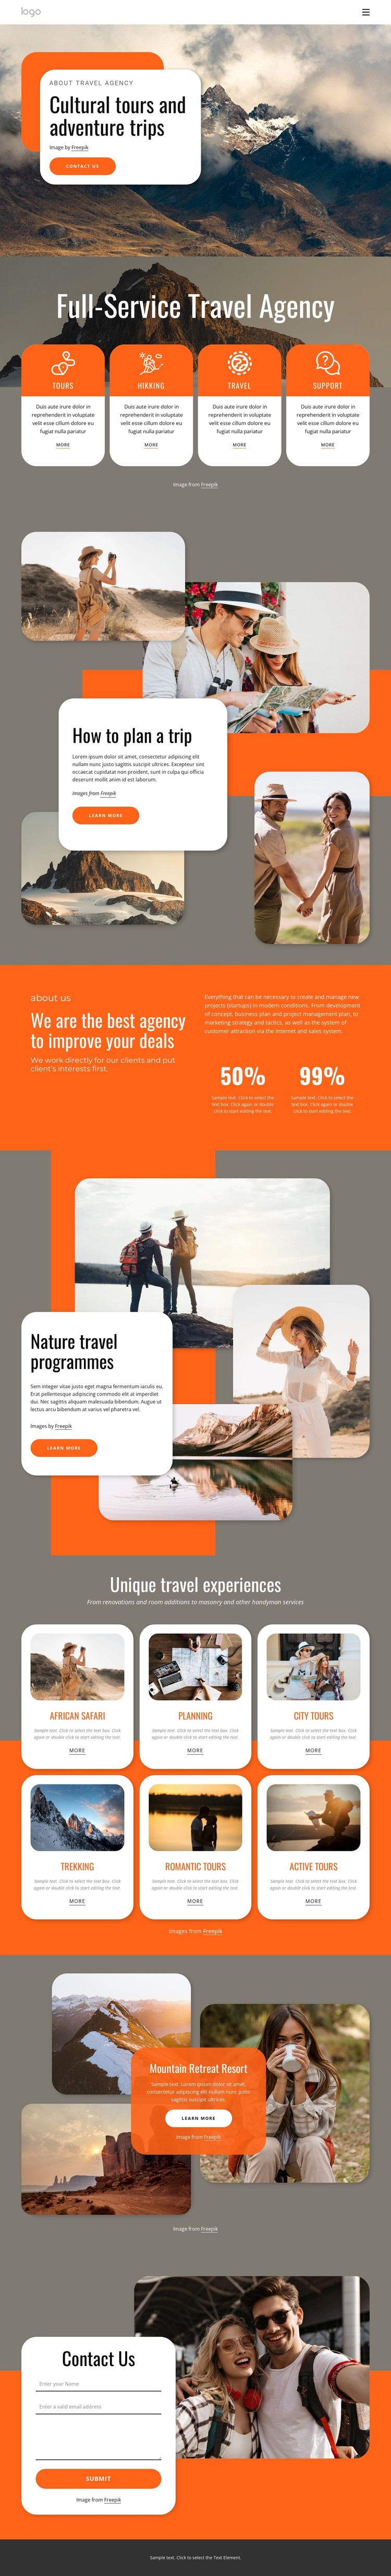 Group travel for all ages WordPress Theme